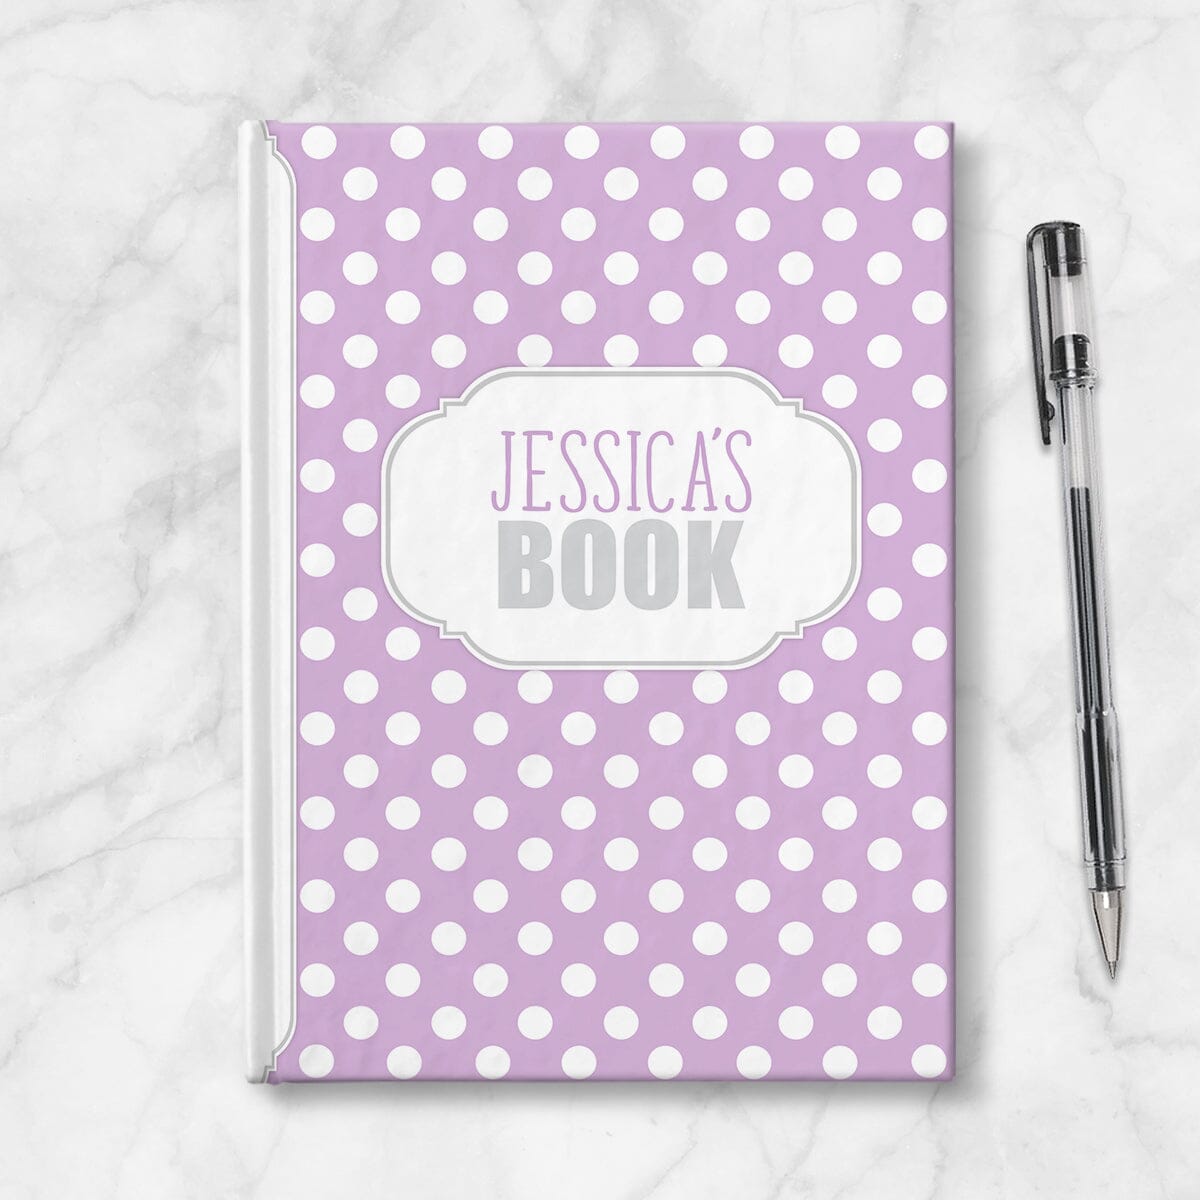 Personalized Purple Polka Dot Journal at Artistically Invited. Image shows the book on a countertop next to a pen.